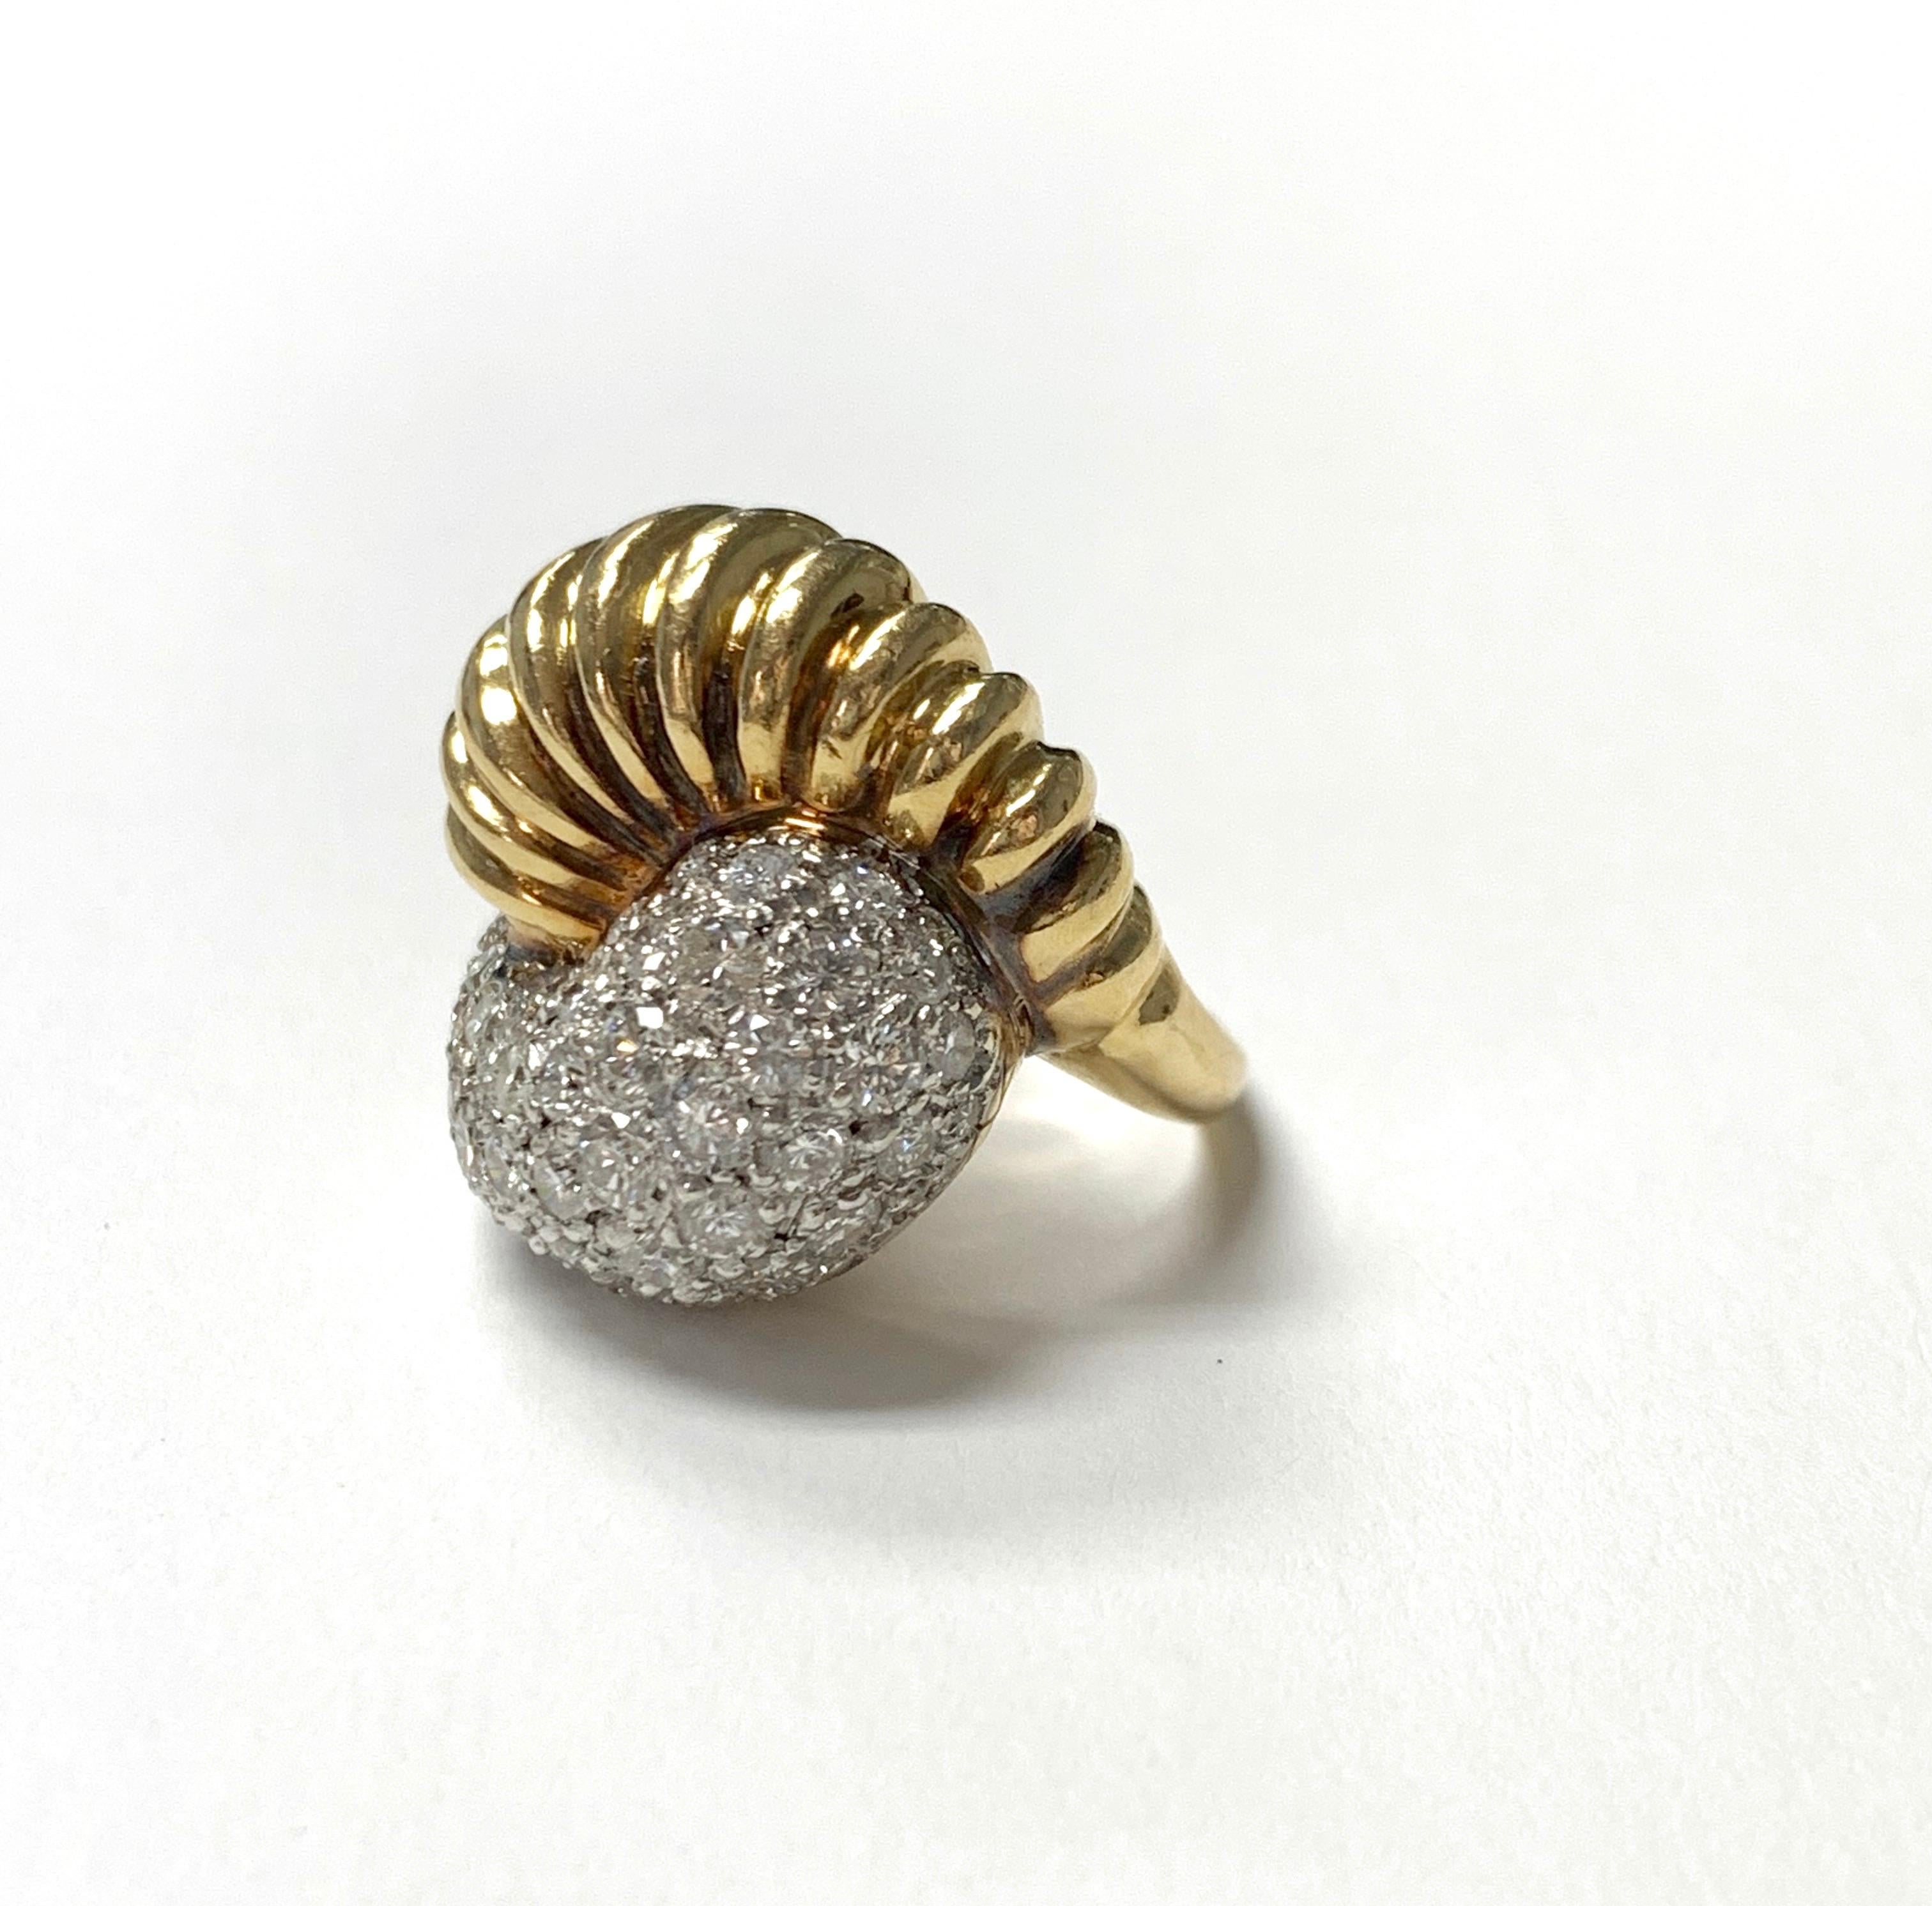 Unique Diamond cocktail ring in 14k yellow gold.
Diamond weight : 2 carat ( H color and SI1 clarity ) 
Metal : 14k 
Ring size : 4 1/2 
